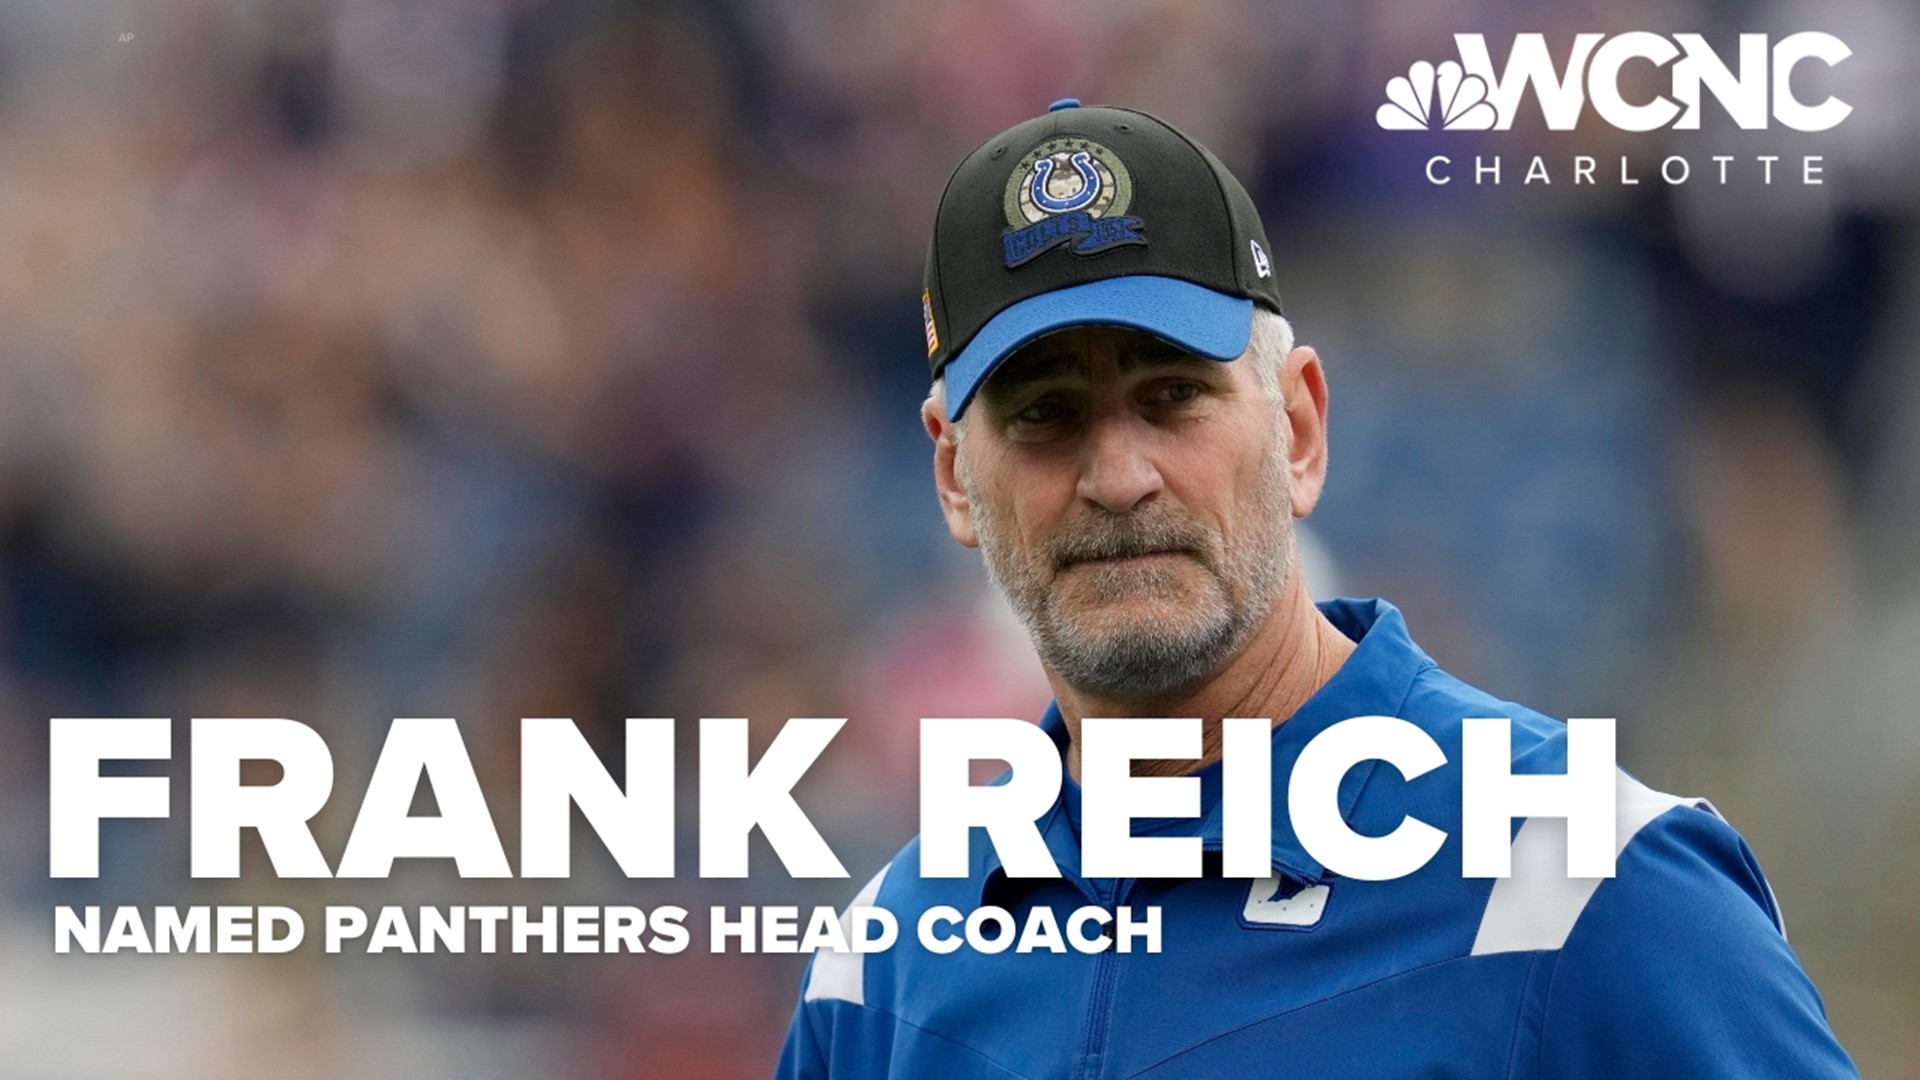 Nick Carboni and Julian Council discuss Carolina's hiring of Frank Reich as head coach and the controversy over interim coach Steve Wilks not getting the job.